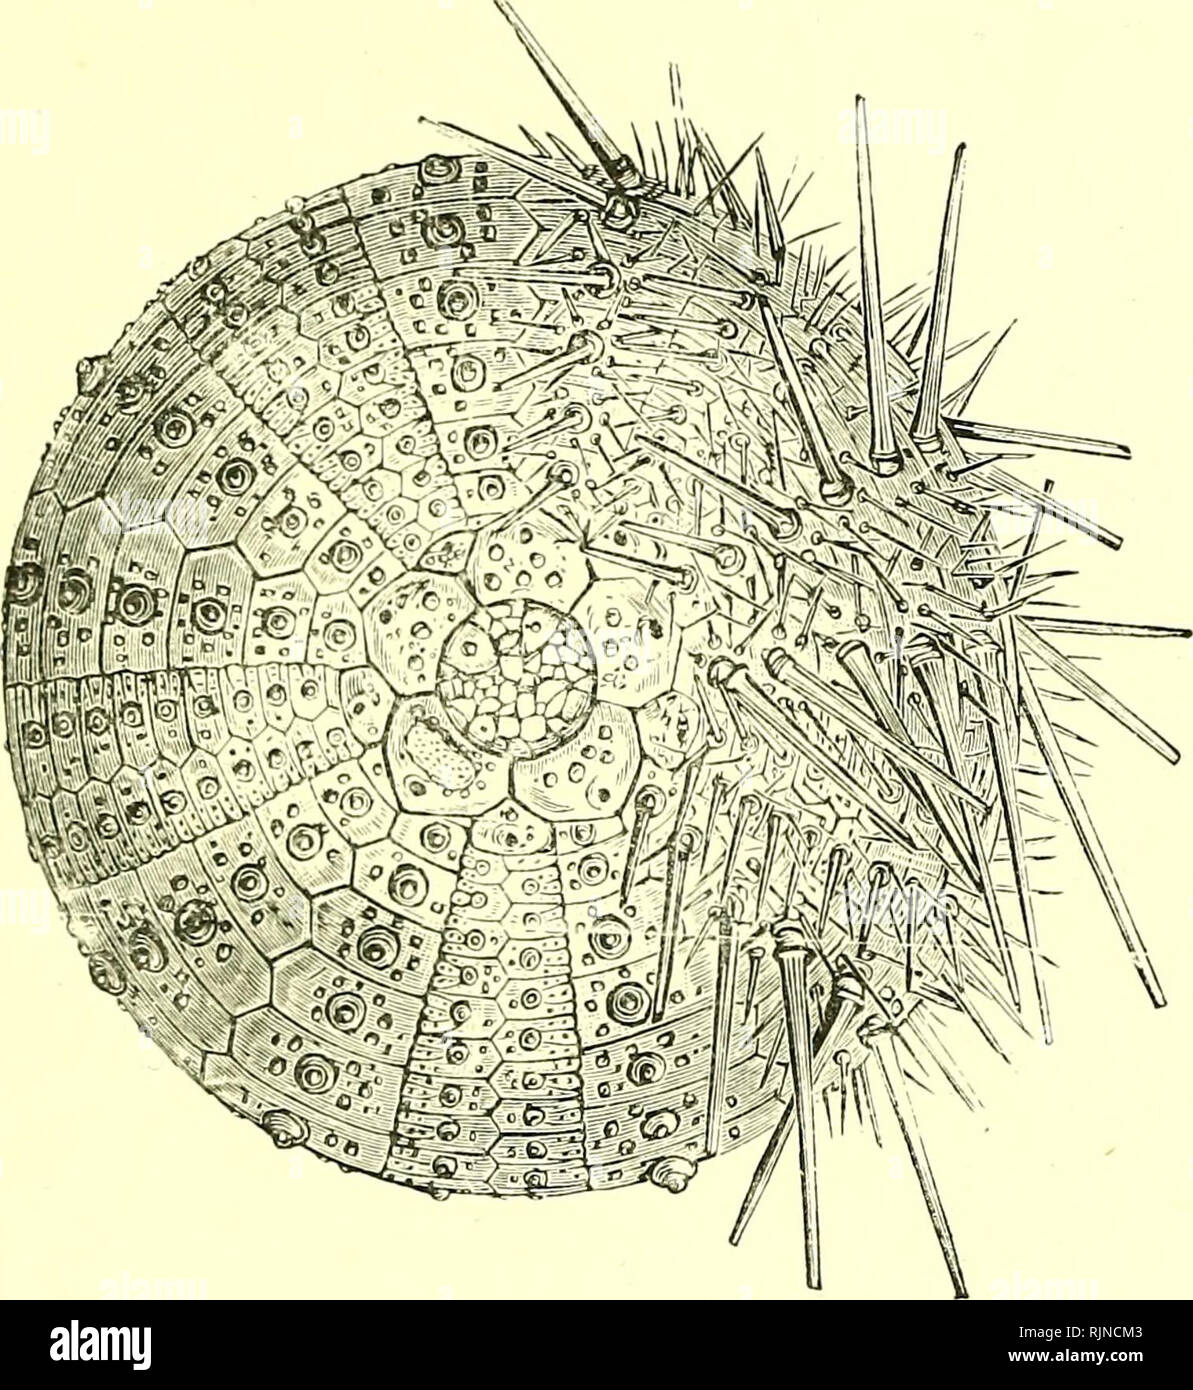 . Elementary text-book of zoology [electronic resource]. Zoology. ARCHICCELOMATA. 17, Fig. 9S.—A Common Sea-Ukchin (Echinus Microstoma ). Natural size (After Wyvili.e Thomson).. The animal is seen from the aboral surface, from the left half of which the spines have been removed. The plates can be identilied from the next figure. l^ig- 99-—Diagram of Dorsal View of Echinus SHOWING THE PlATES. Genital Plate. — Madreporite. - Anus. Ocular Plate. Ant-Ambulacral Plates. Ambulacral Plates. In the sand-dwelling types, or Ileart-urchins, such as Spatangits there are no lantern nor tedh^ and the body b Stock Photo